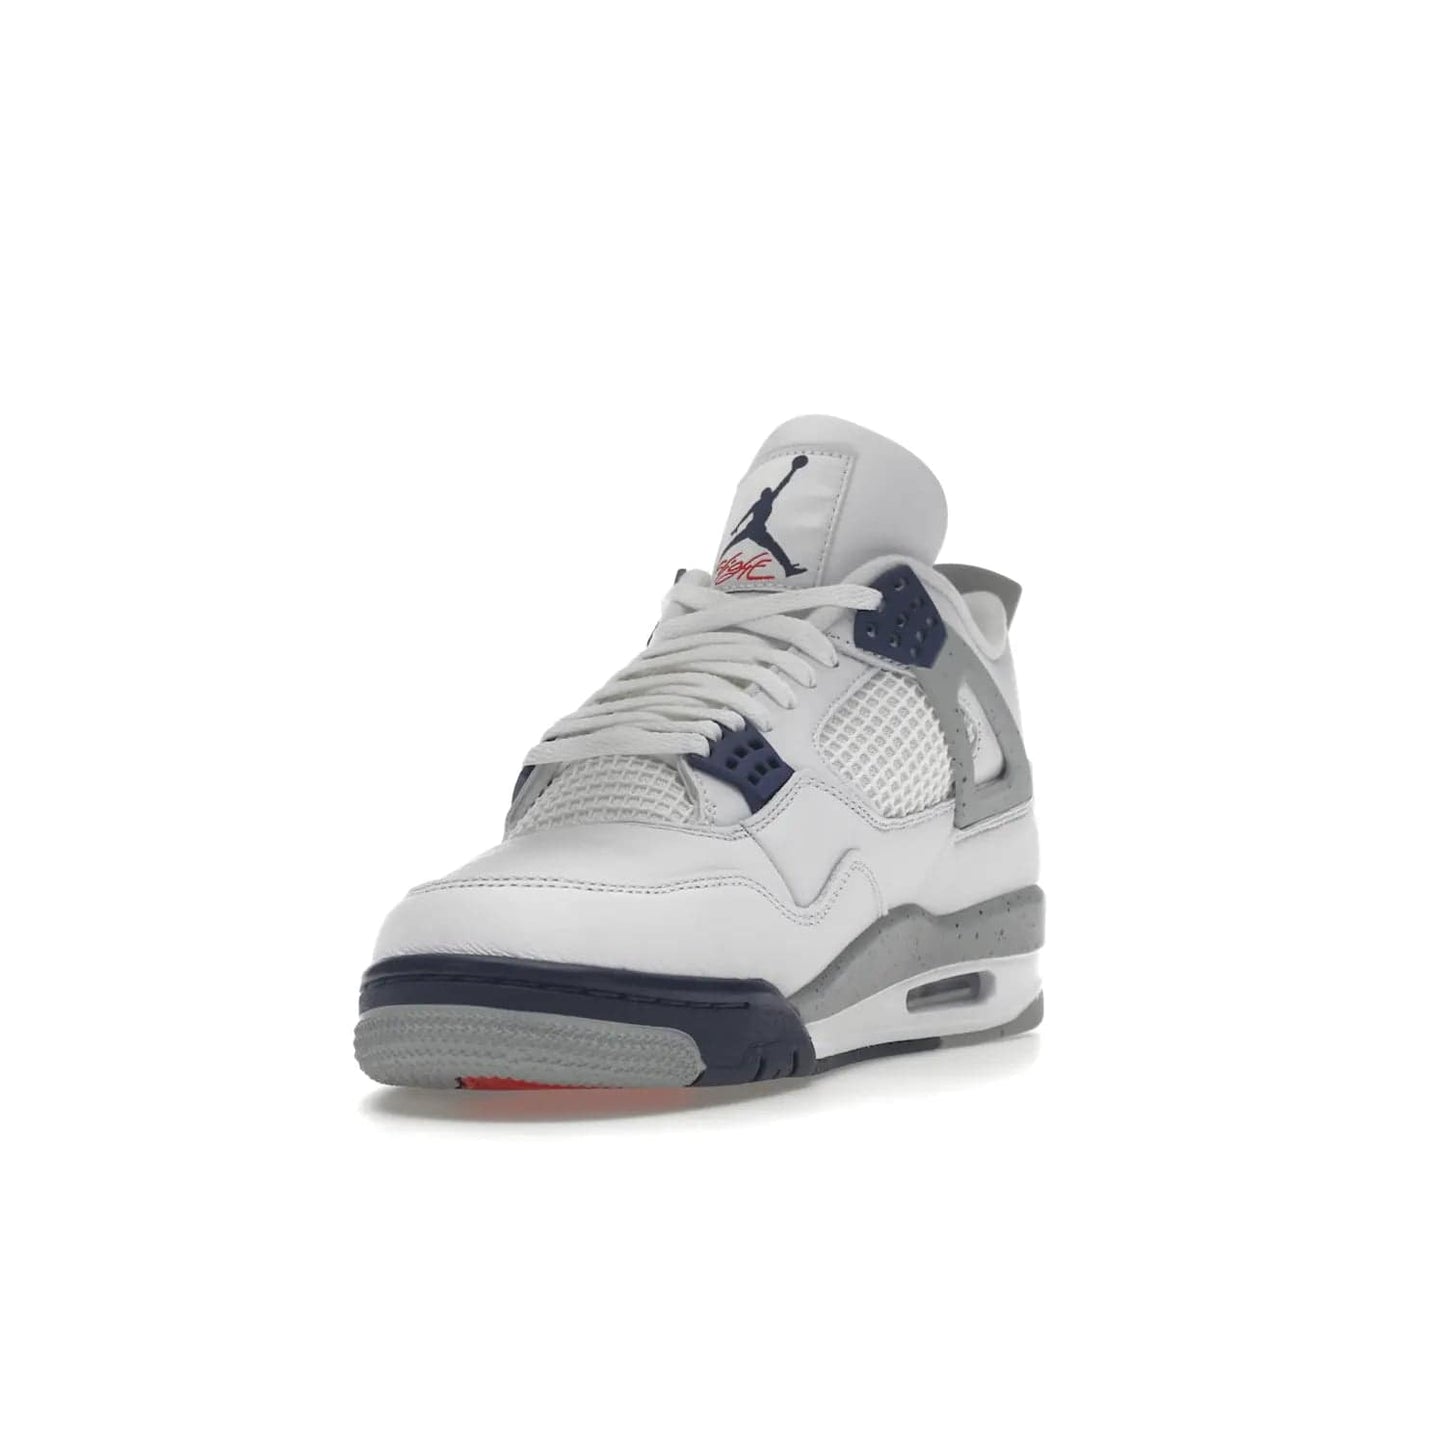 Jordan 4 Retro Midnight Navy - Image 13 - Only at www.BallersClubKickz.com - Shop the Air Jordan Retro 4 White Midnight Navy. Stand out with a classic white leather upper, black support wings, midnight navy eyelets, and Crimson Jumpman tongue tag. Unbeatable comfort with two-tone polyurethane midsole with encapsulated Air technology. Get yours before October 29th, 2022.